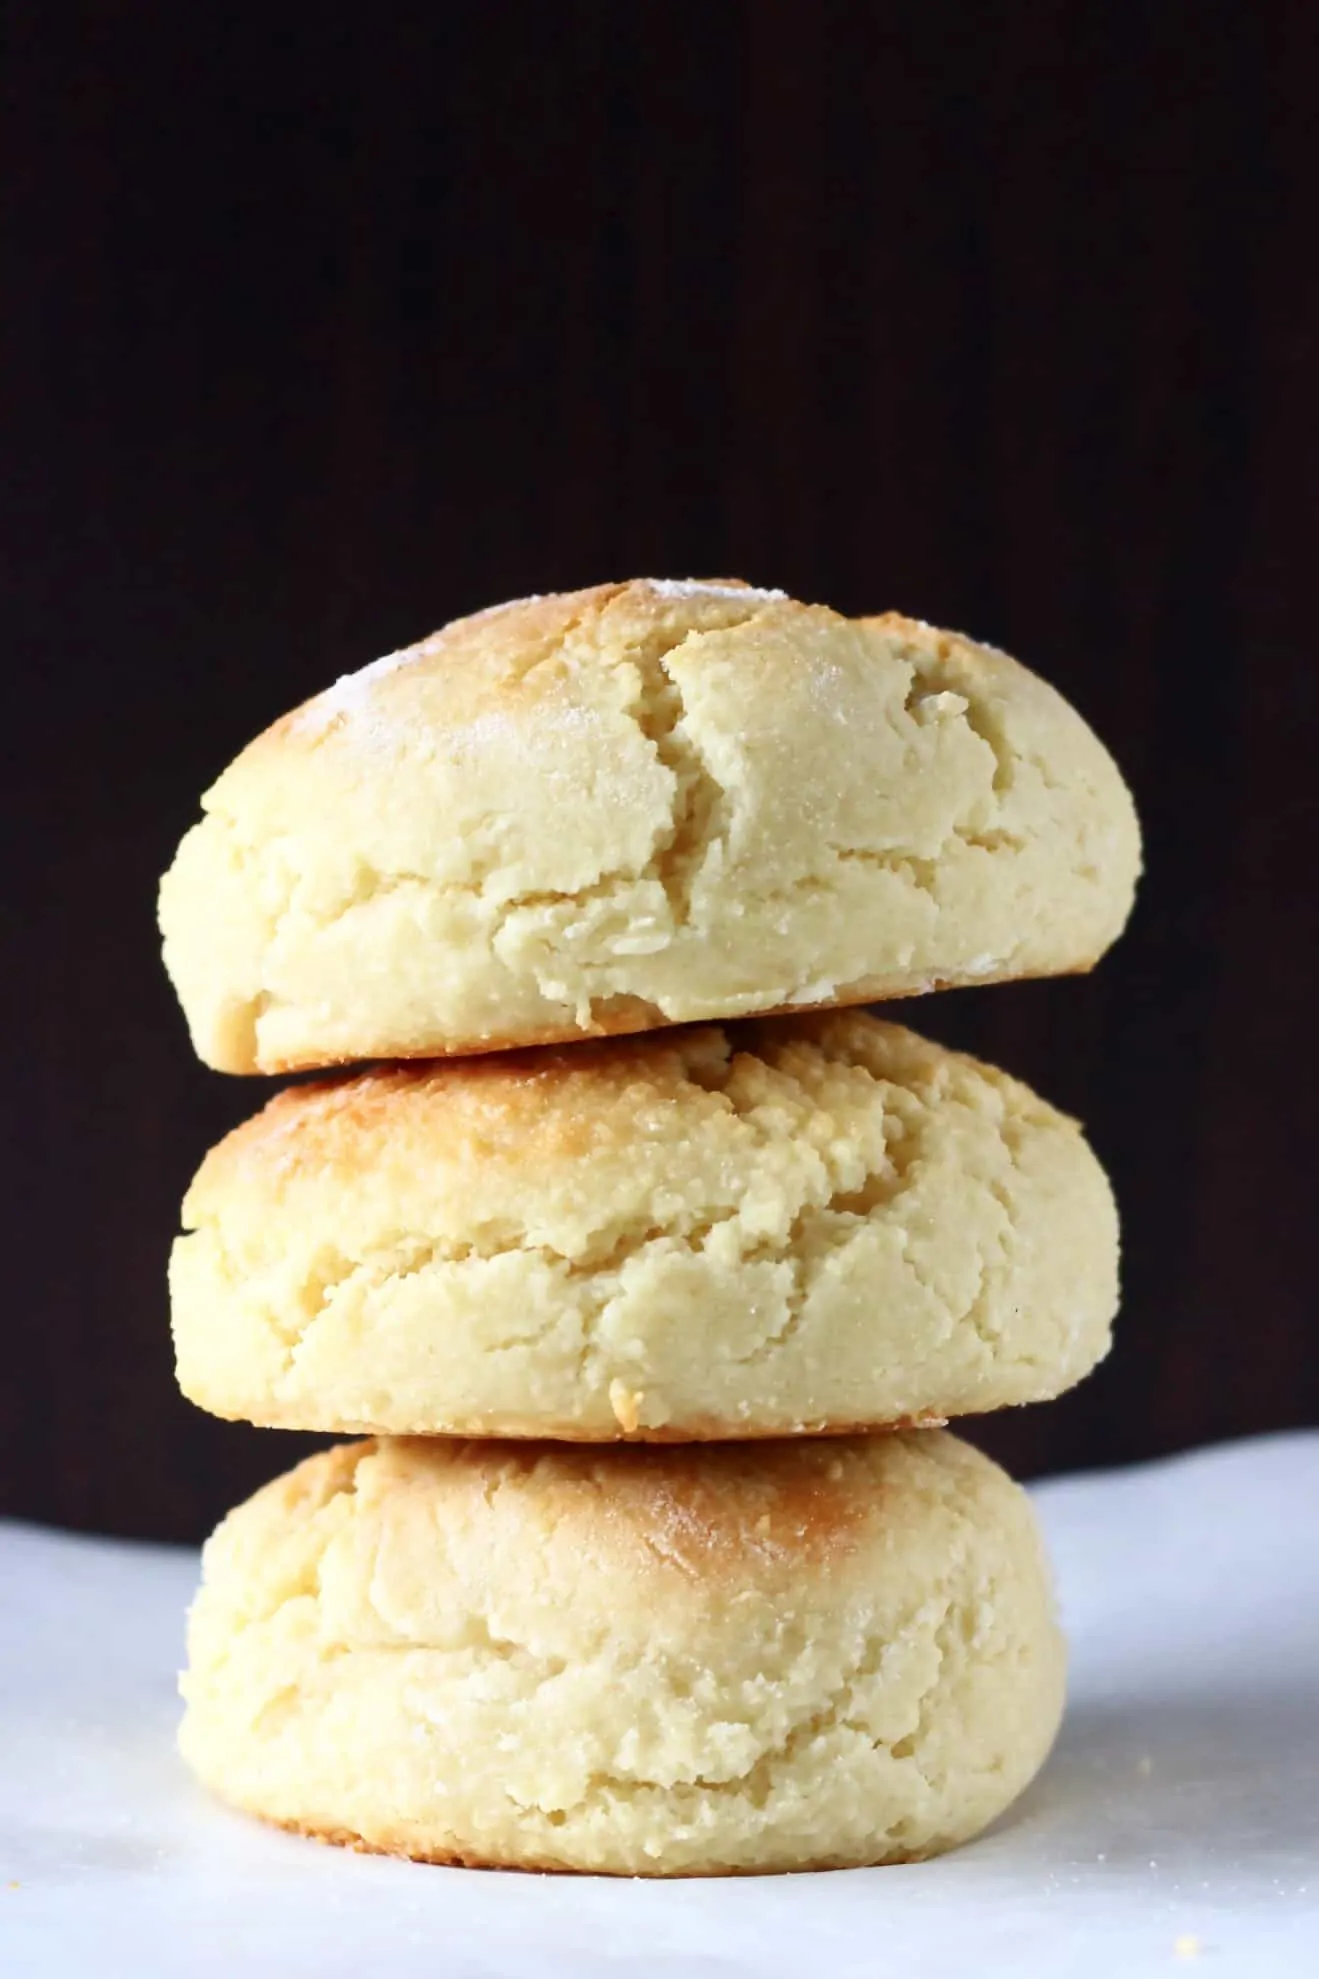 Three gluten-free vegan biscuits stacked on top of each other